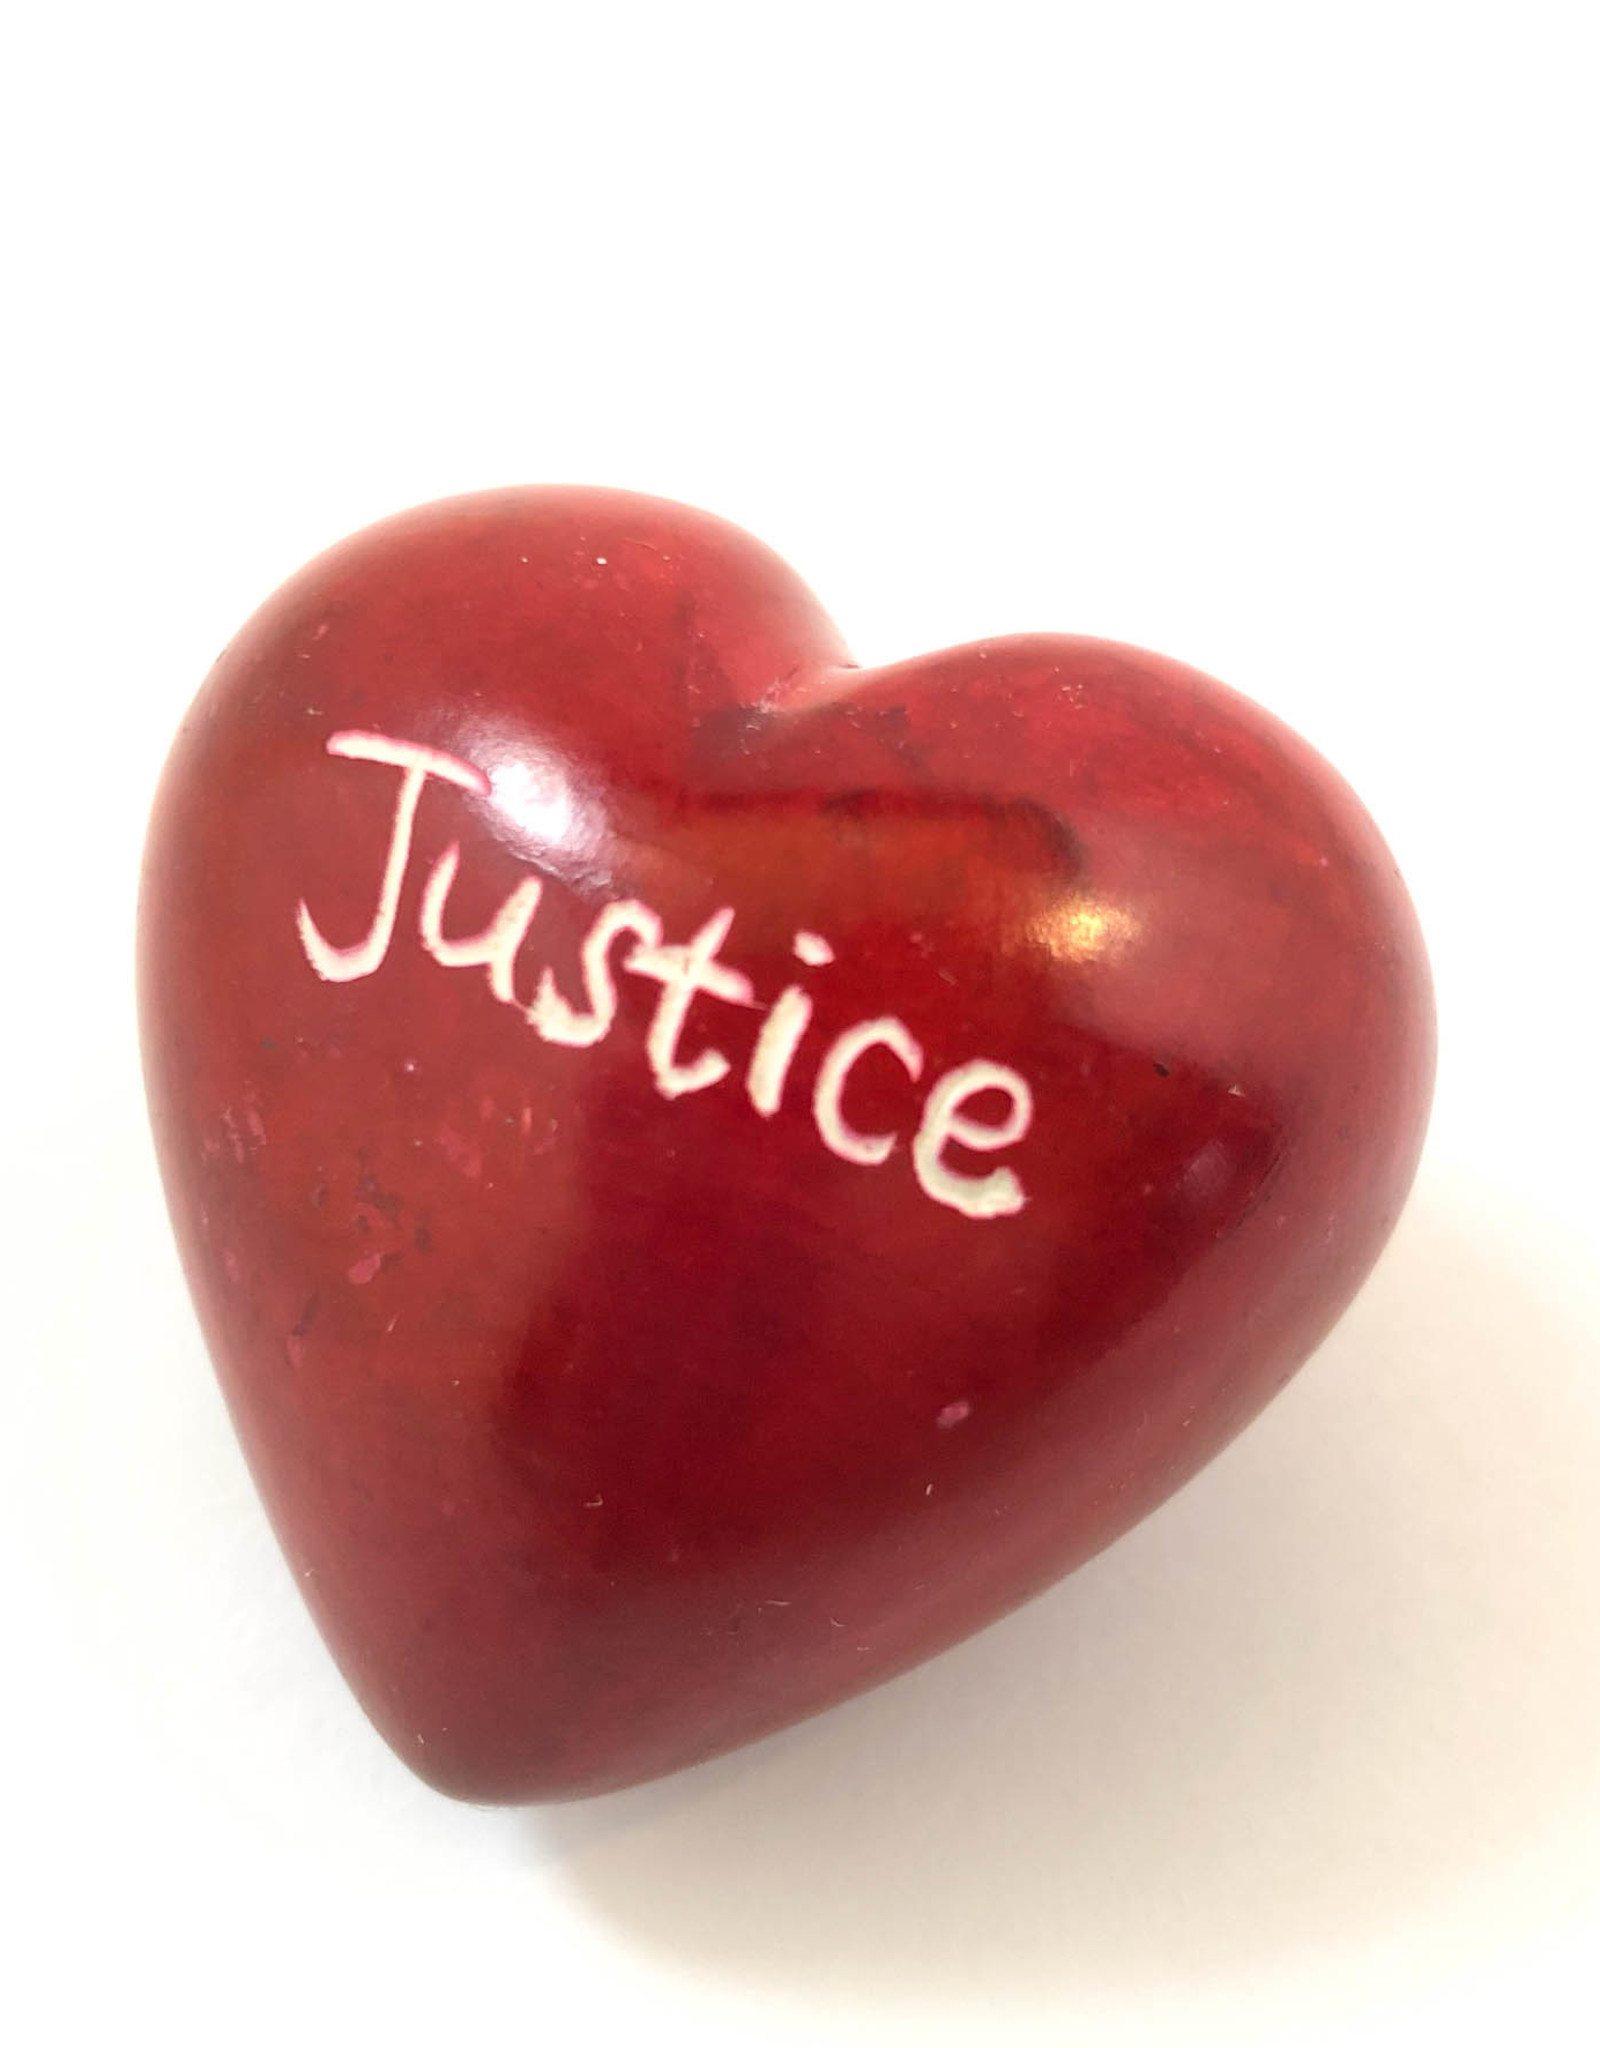 Venture Imports Word Hearts - Justice, Red